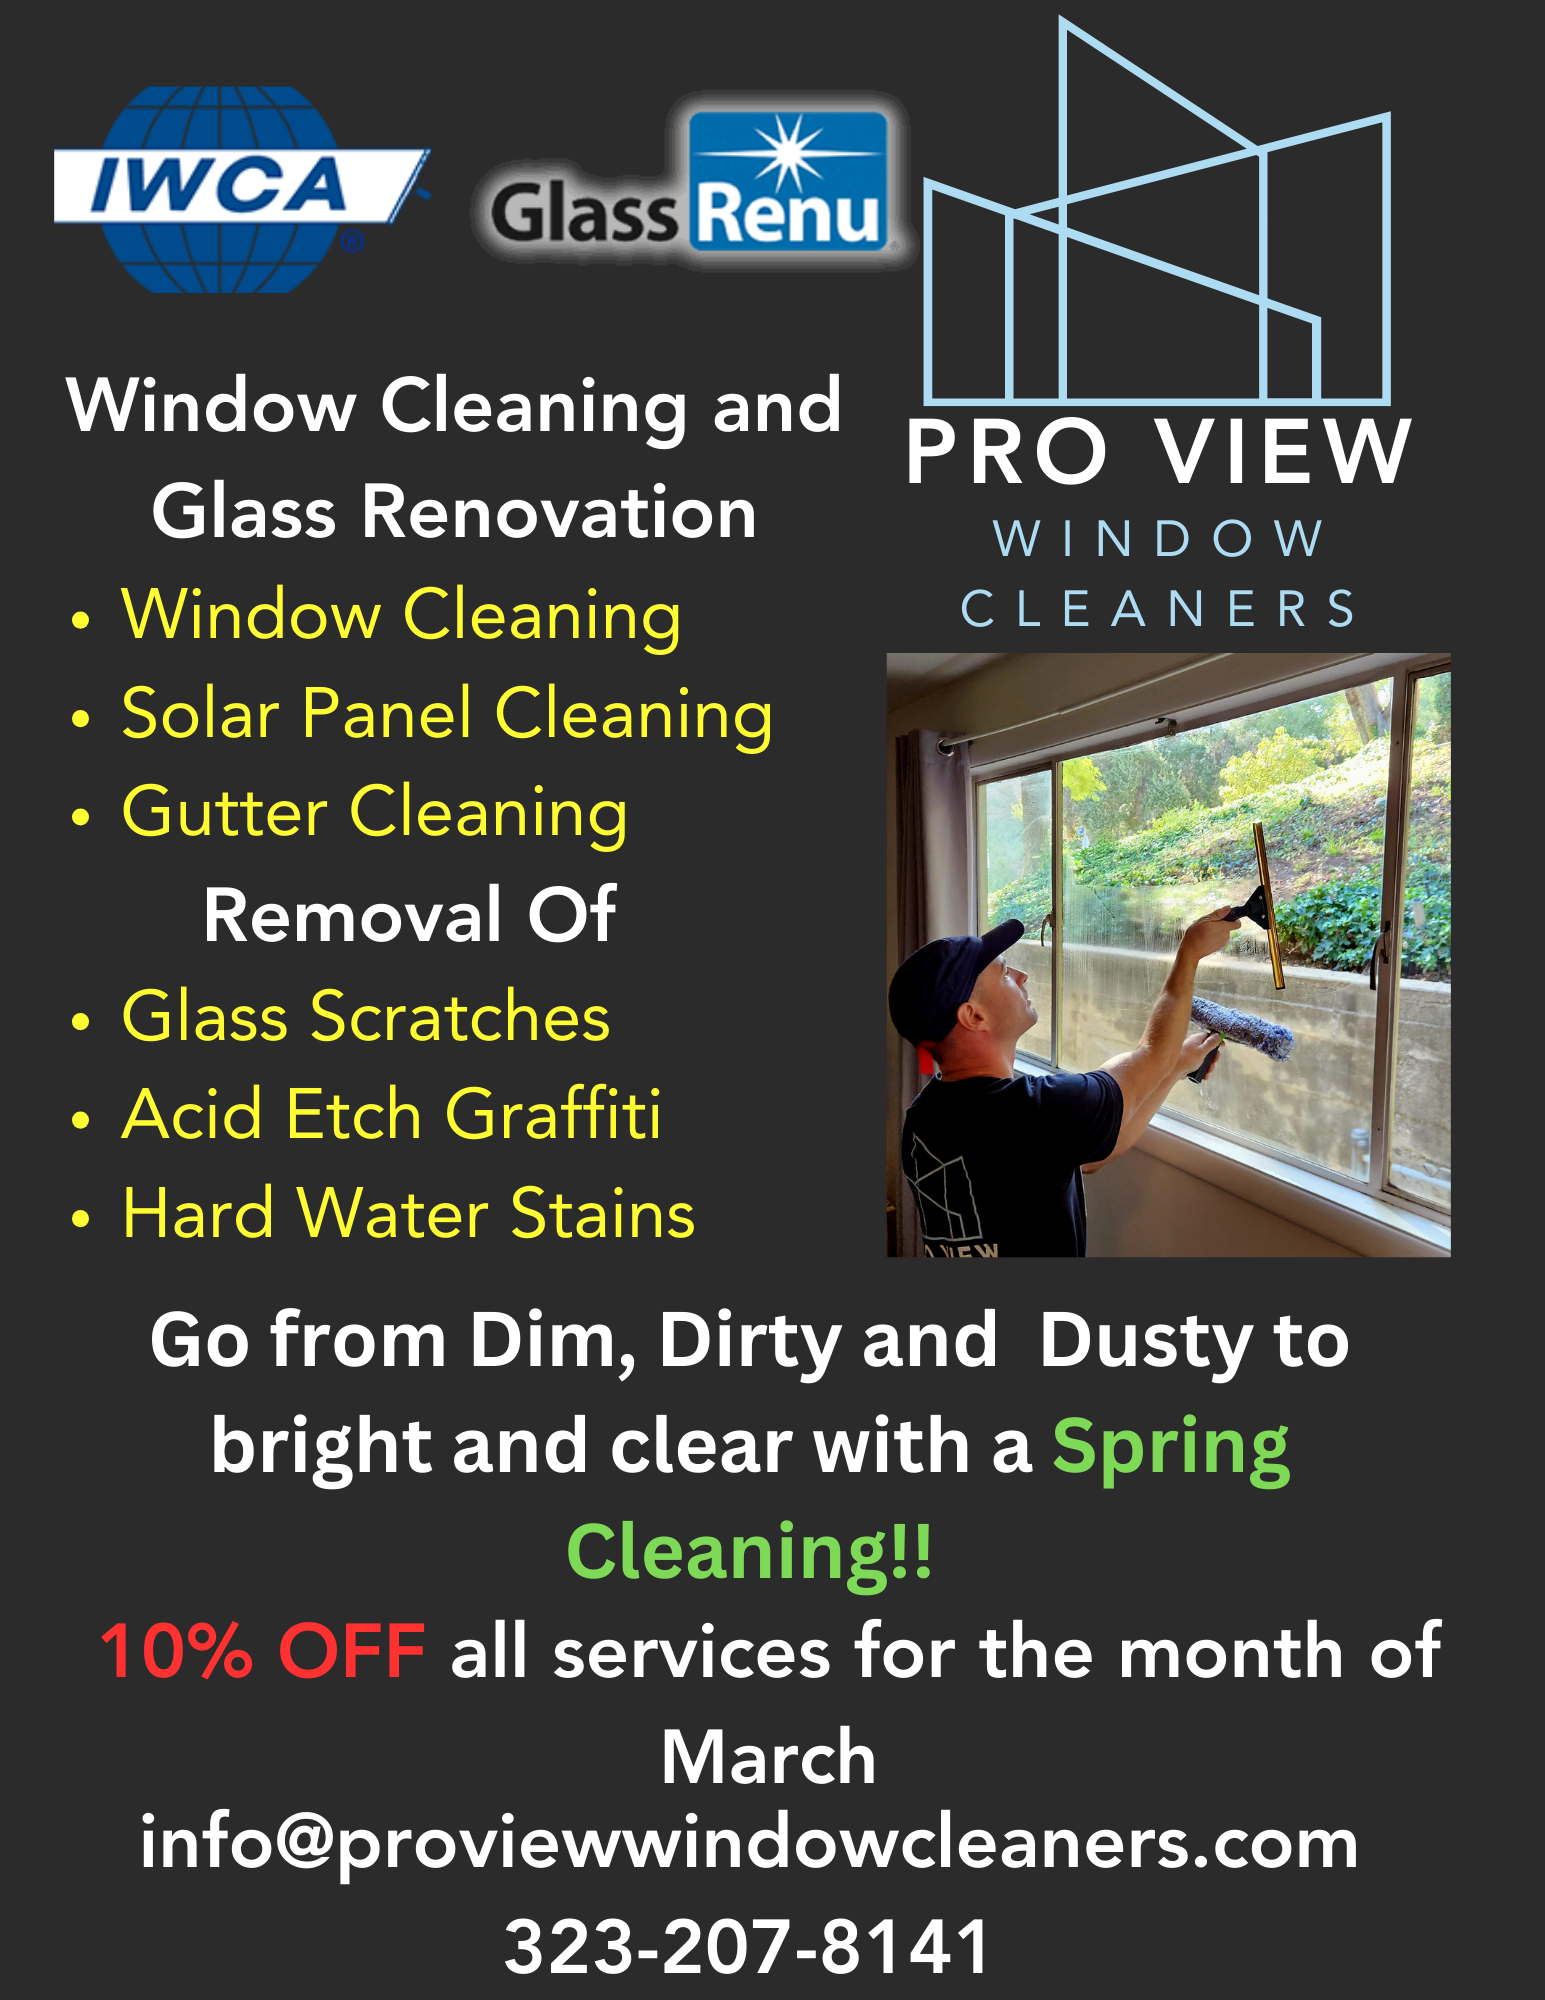 Pro View Window Cleaners intro flyer with services available listed 